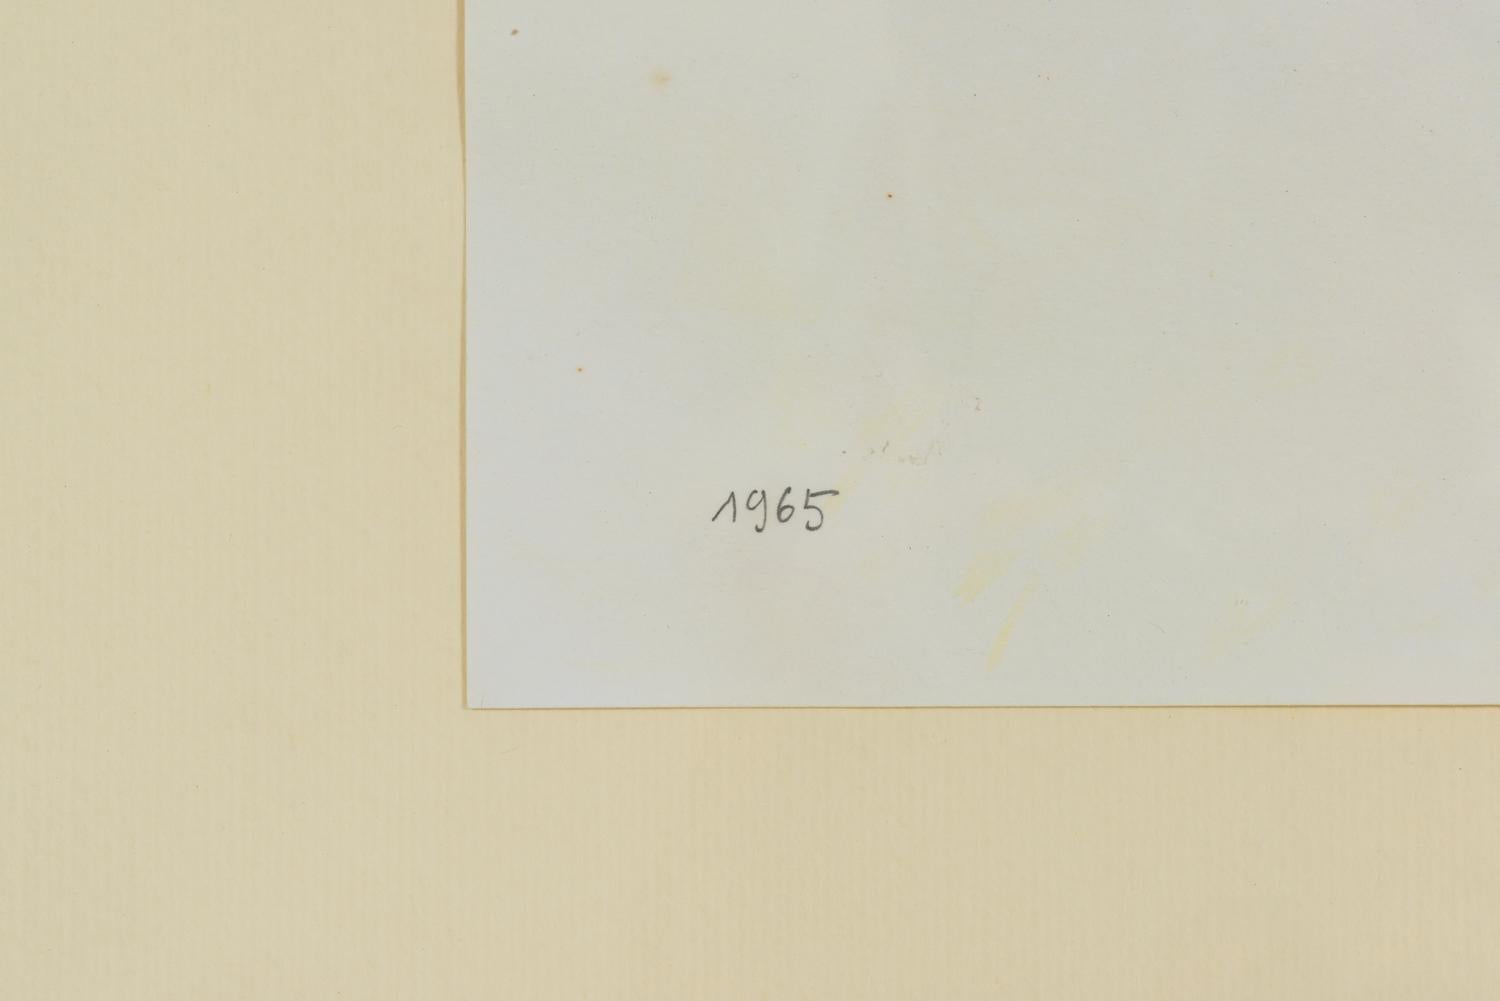 Alphanumeric Homage to Stendhal, work from the early 1960s, signed and dated on the front, accompanied by certification of authenticity on photograph issued by the Sarenco Foundation.
Coming from the Sarenco Foundation, Italy.
Poiché il pezzo